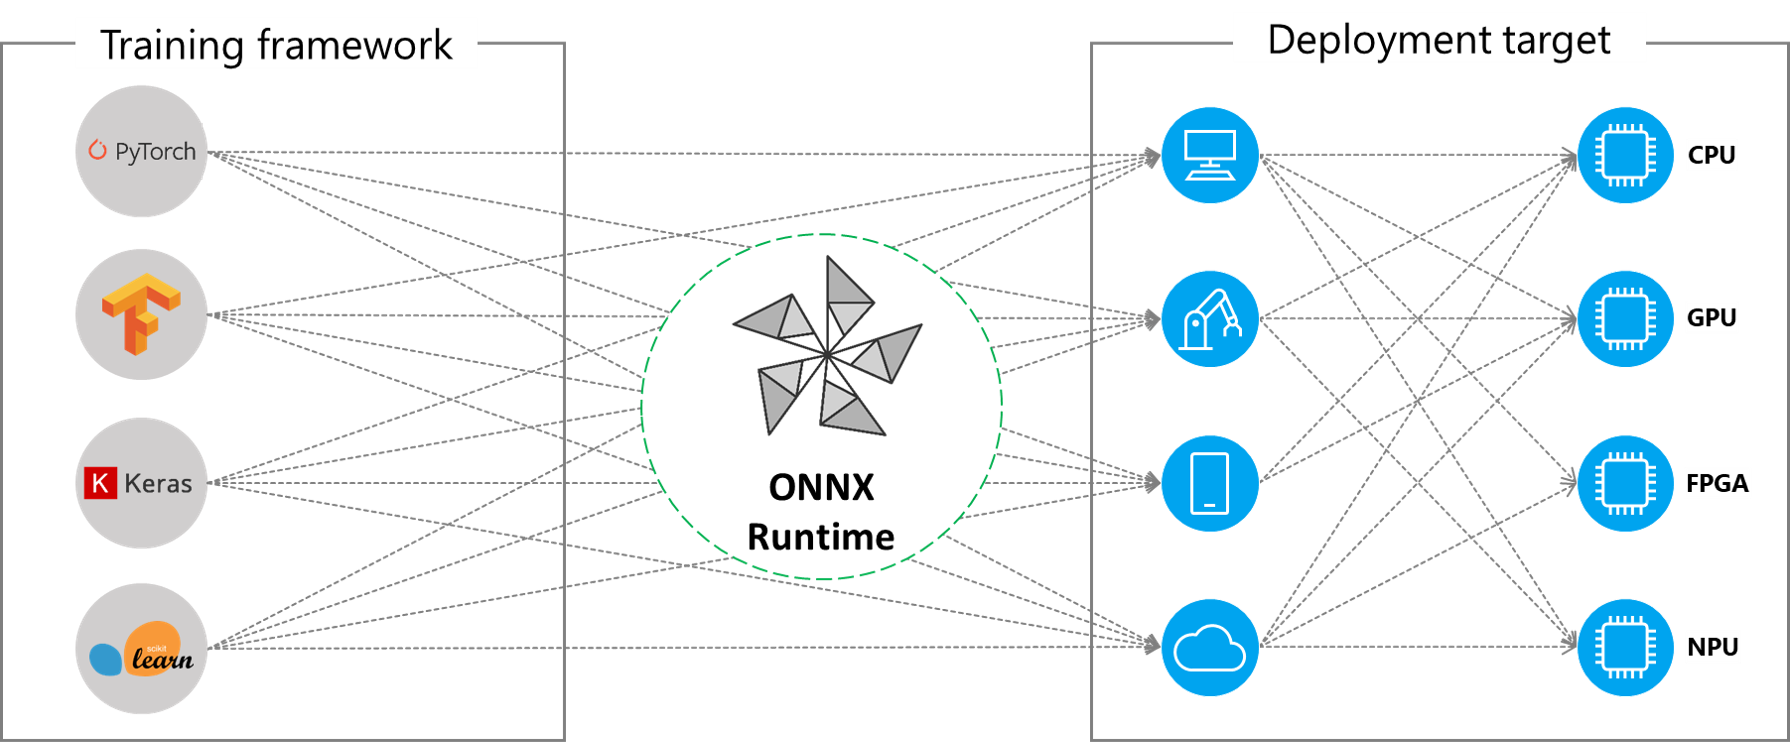 Executing ONNX models across different HW environments